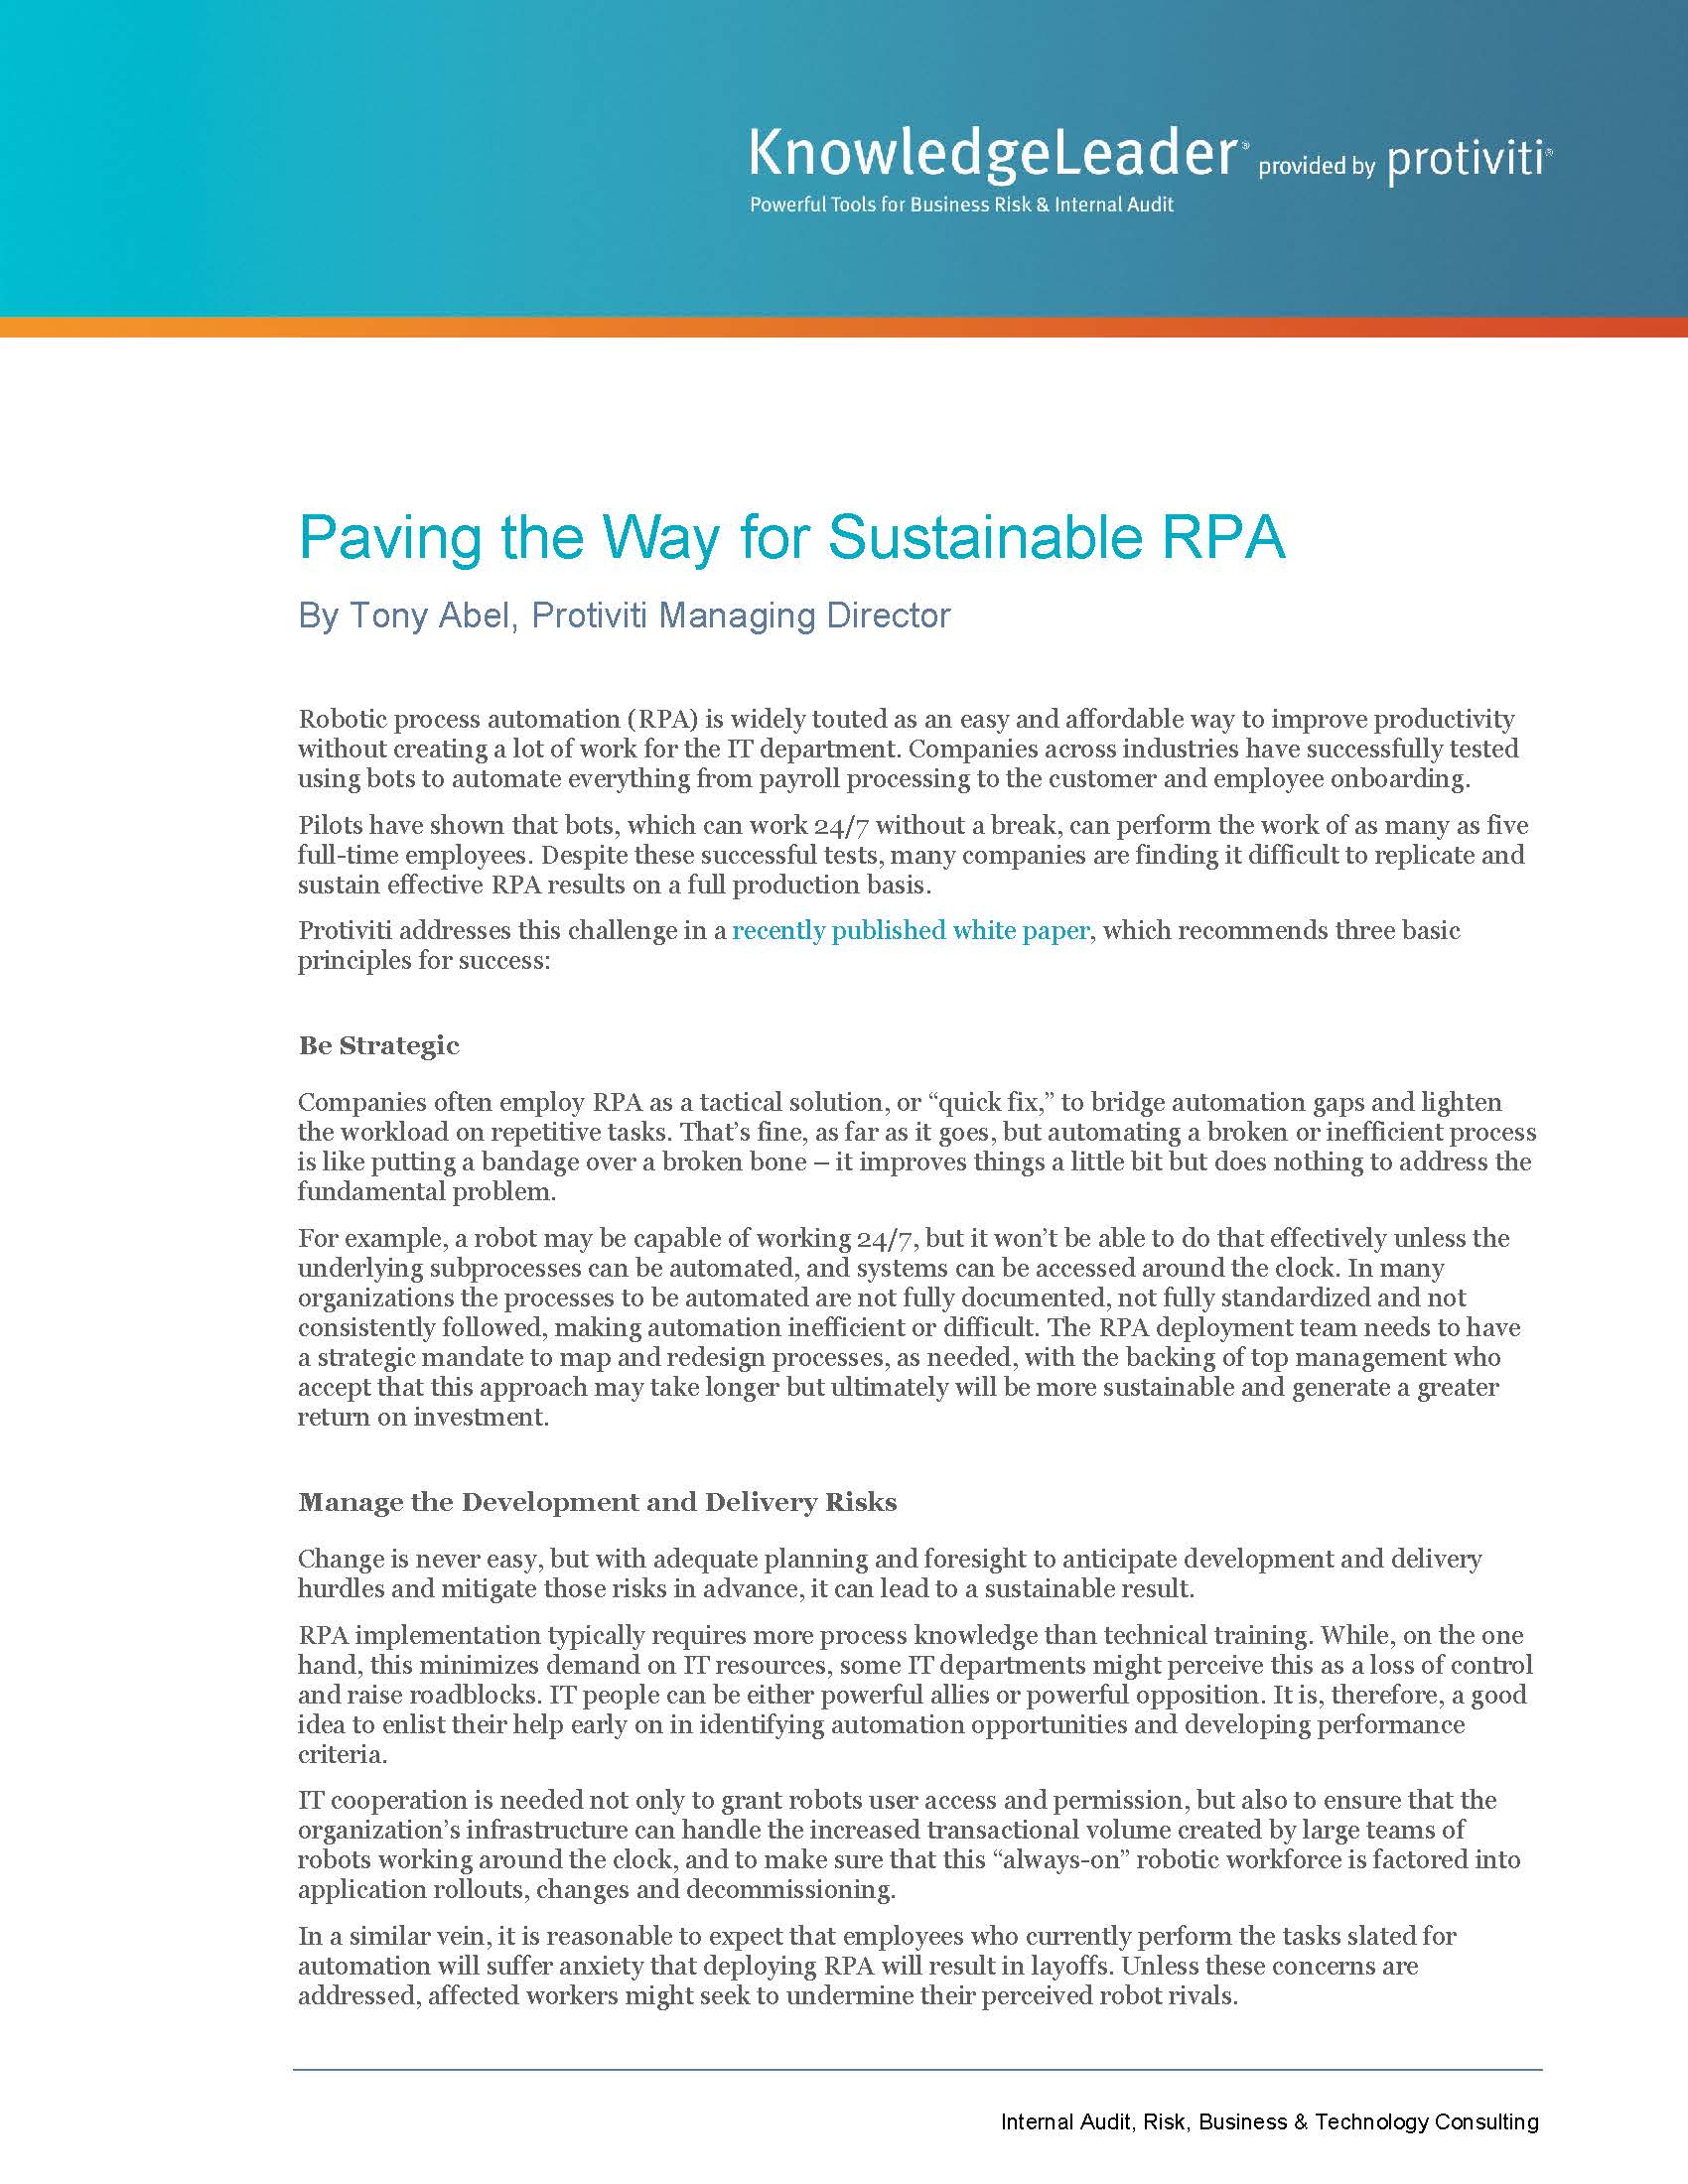 Screenshot of the first page of Paving the Way for Sustainable RPA